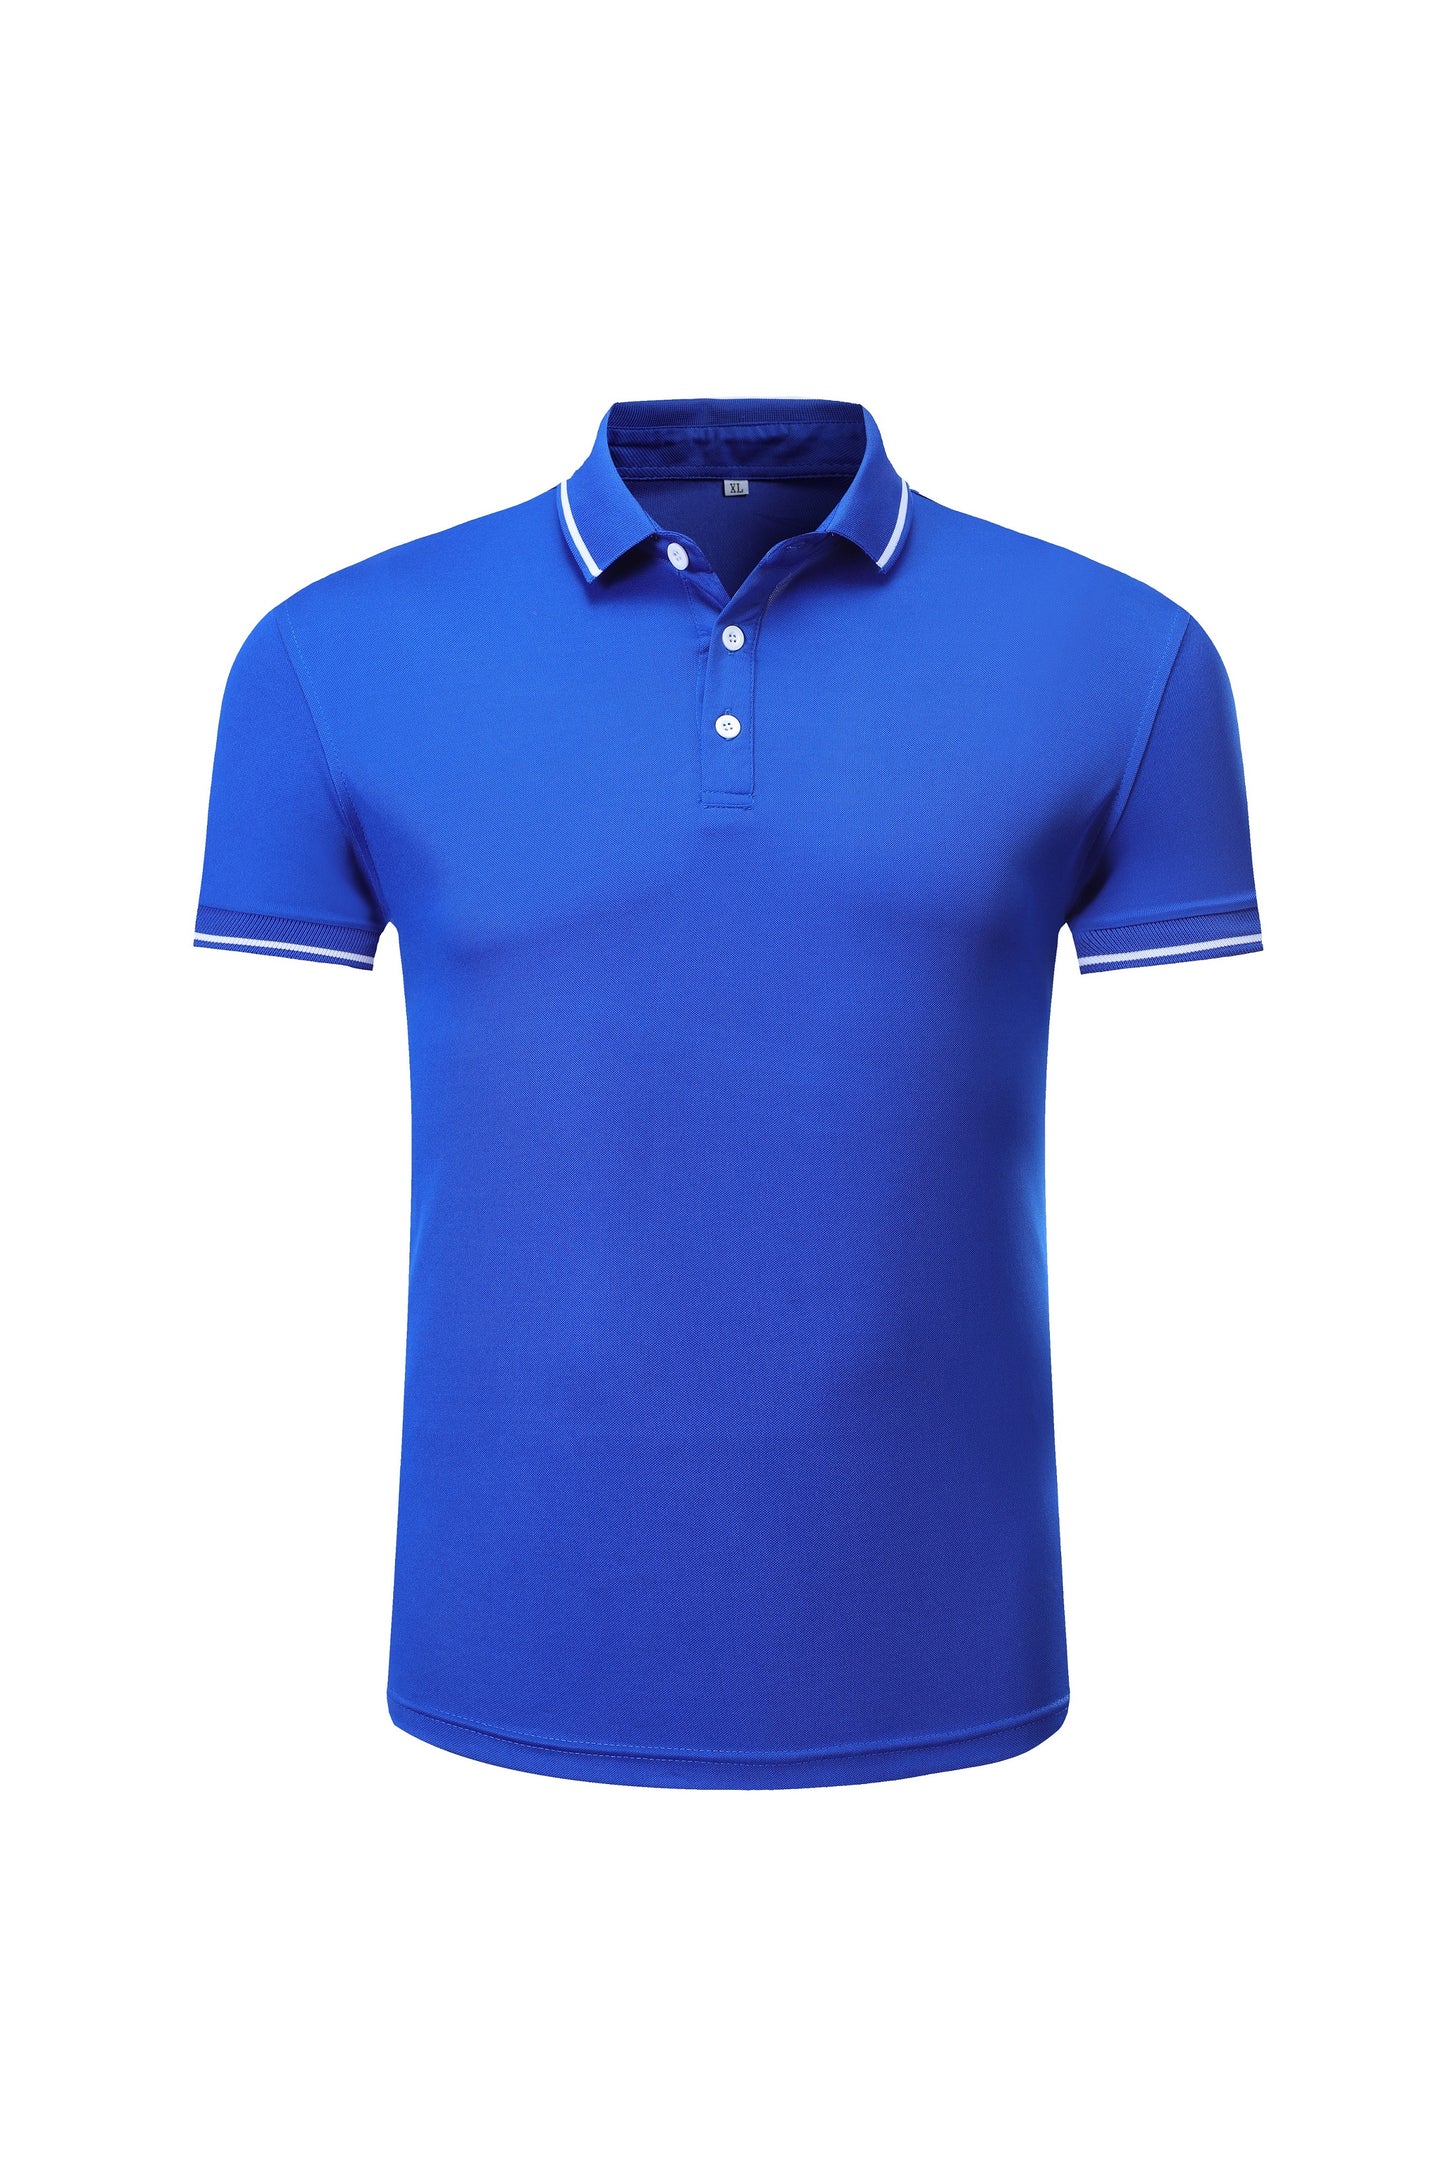 200G  quick dry Good POLO Shirt  100% polyester